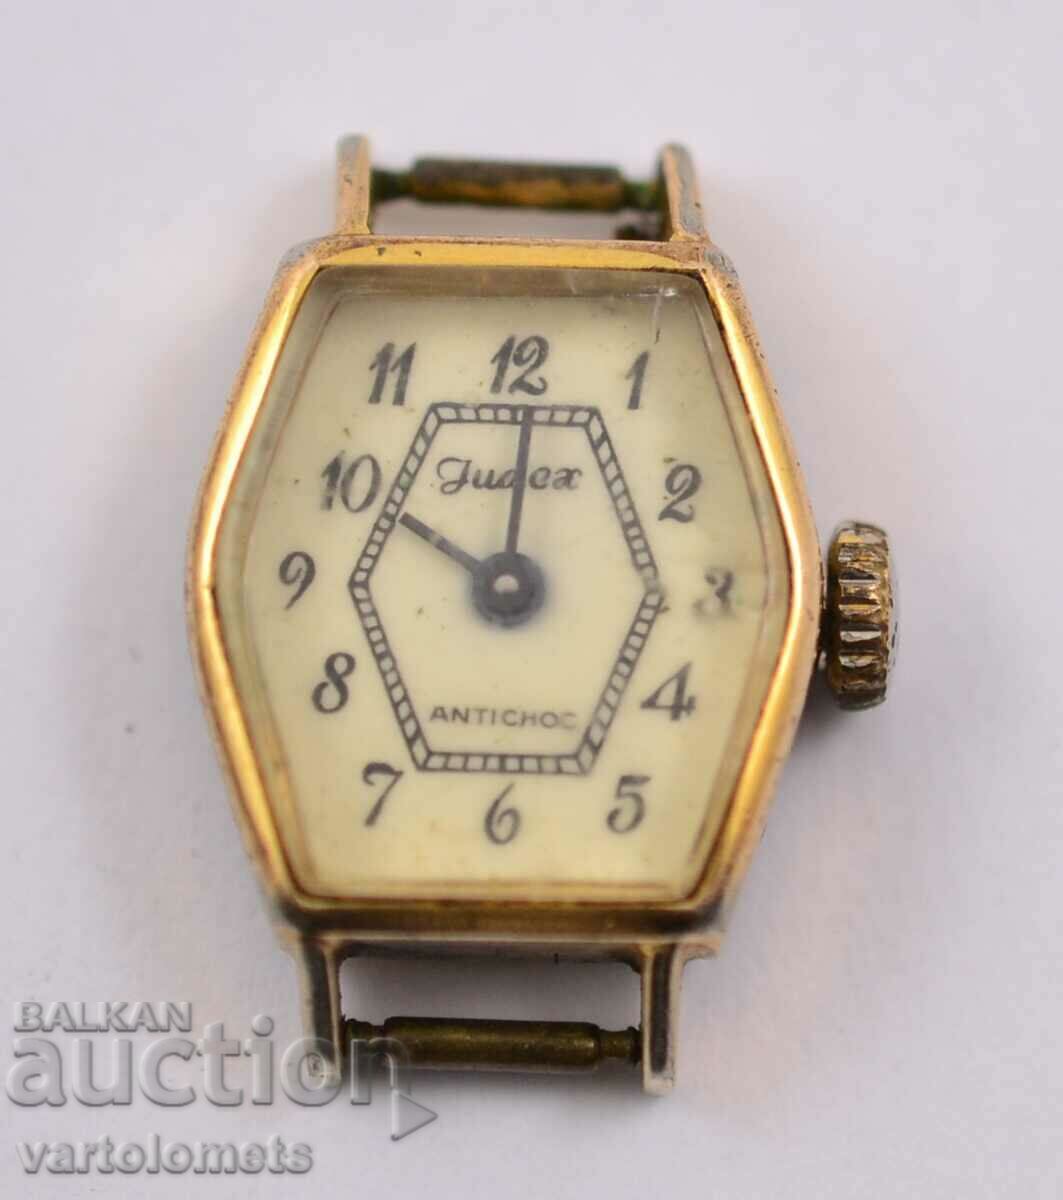 Judex Swiss made women's with gold plating - not working